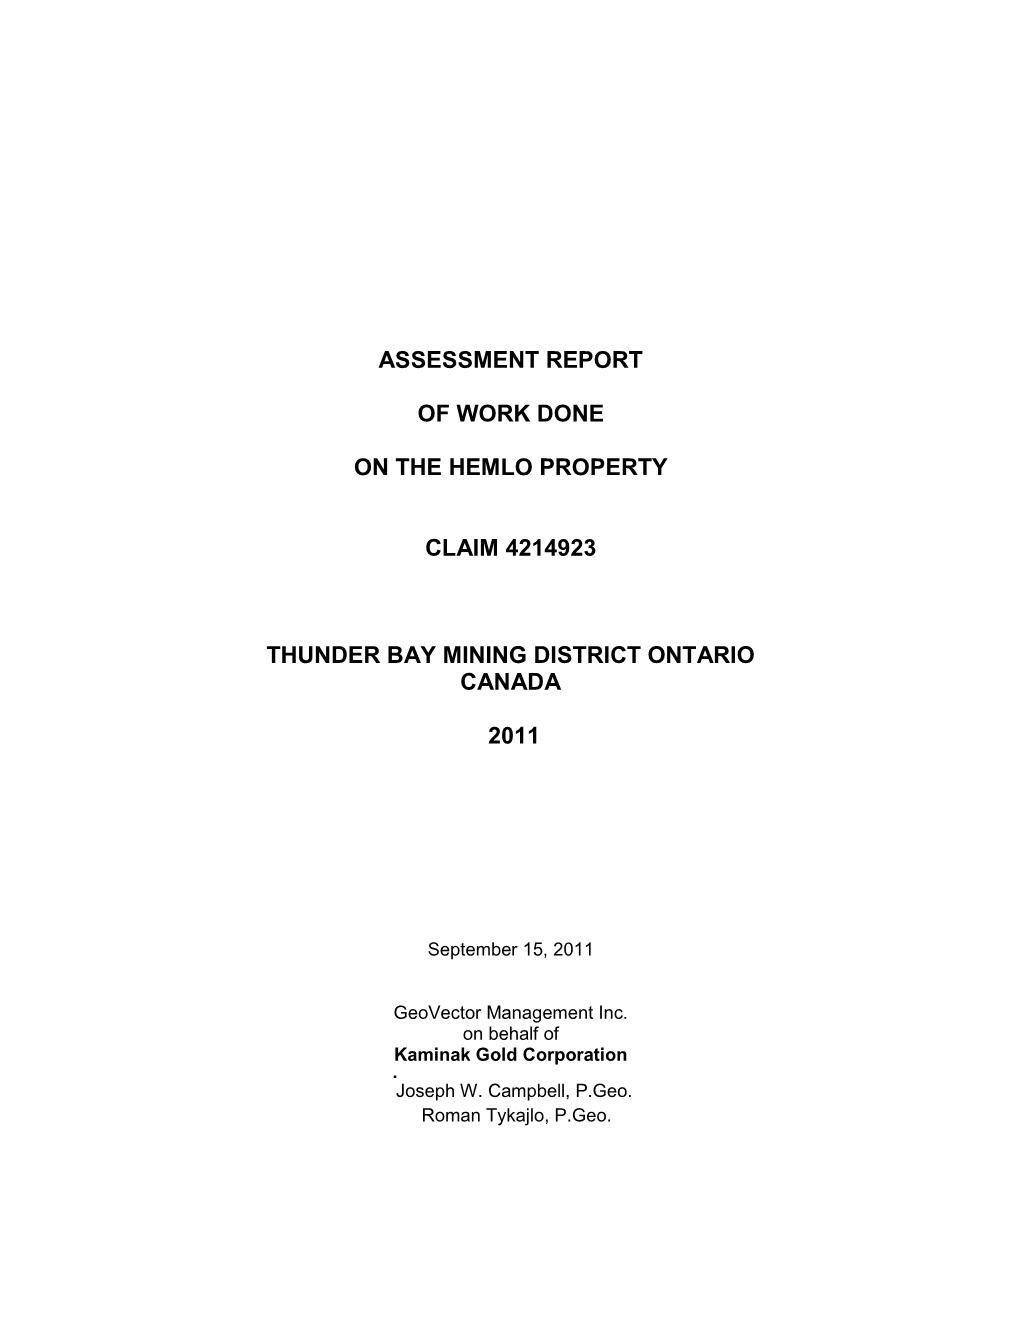 ASSESSMENT REPORT of WORK DONE on the HEMLO PROPERTY, THUNDER BAY MINING DISTRICT ONTARIO, CANADA, 2007 and 2008; April 2009; Assessment Report